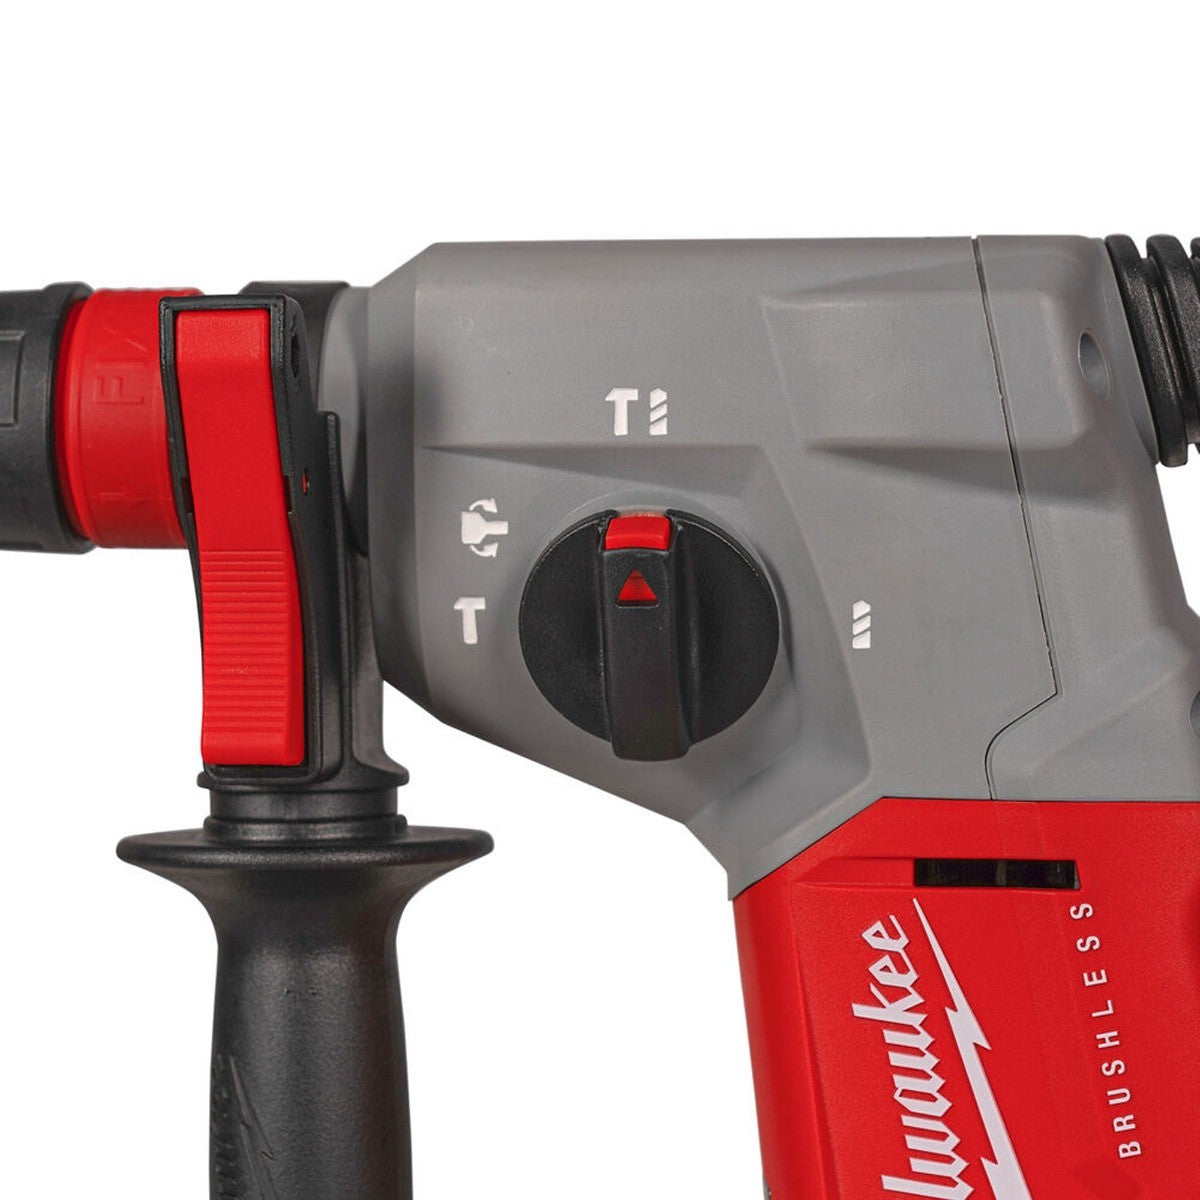 Milwaukee M18BLHX-0X 18V Brushless SDS-Plus Hammer Drill with Case 4933478891